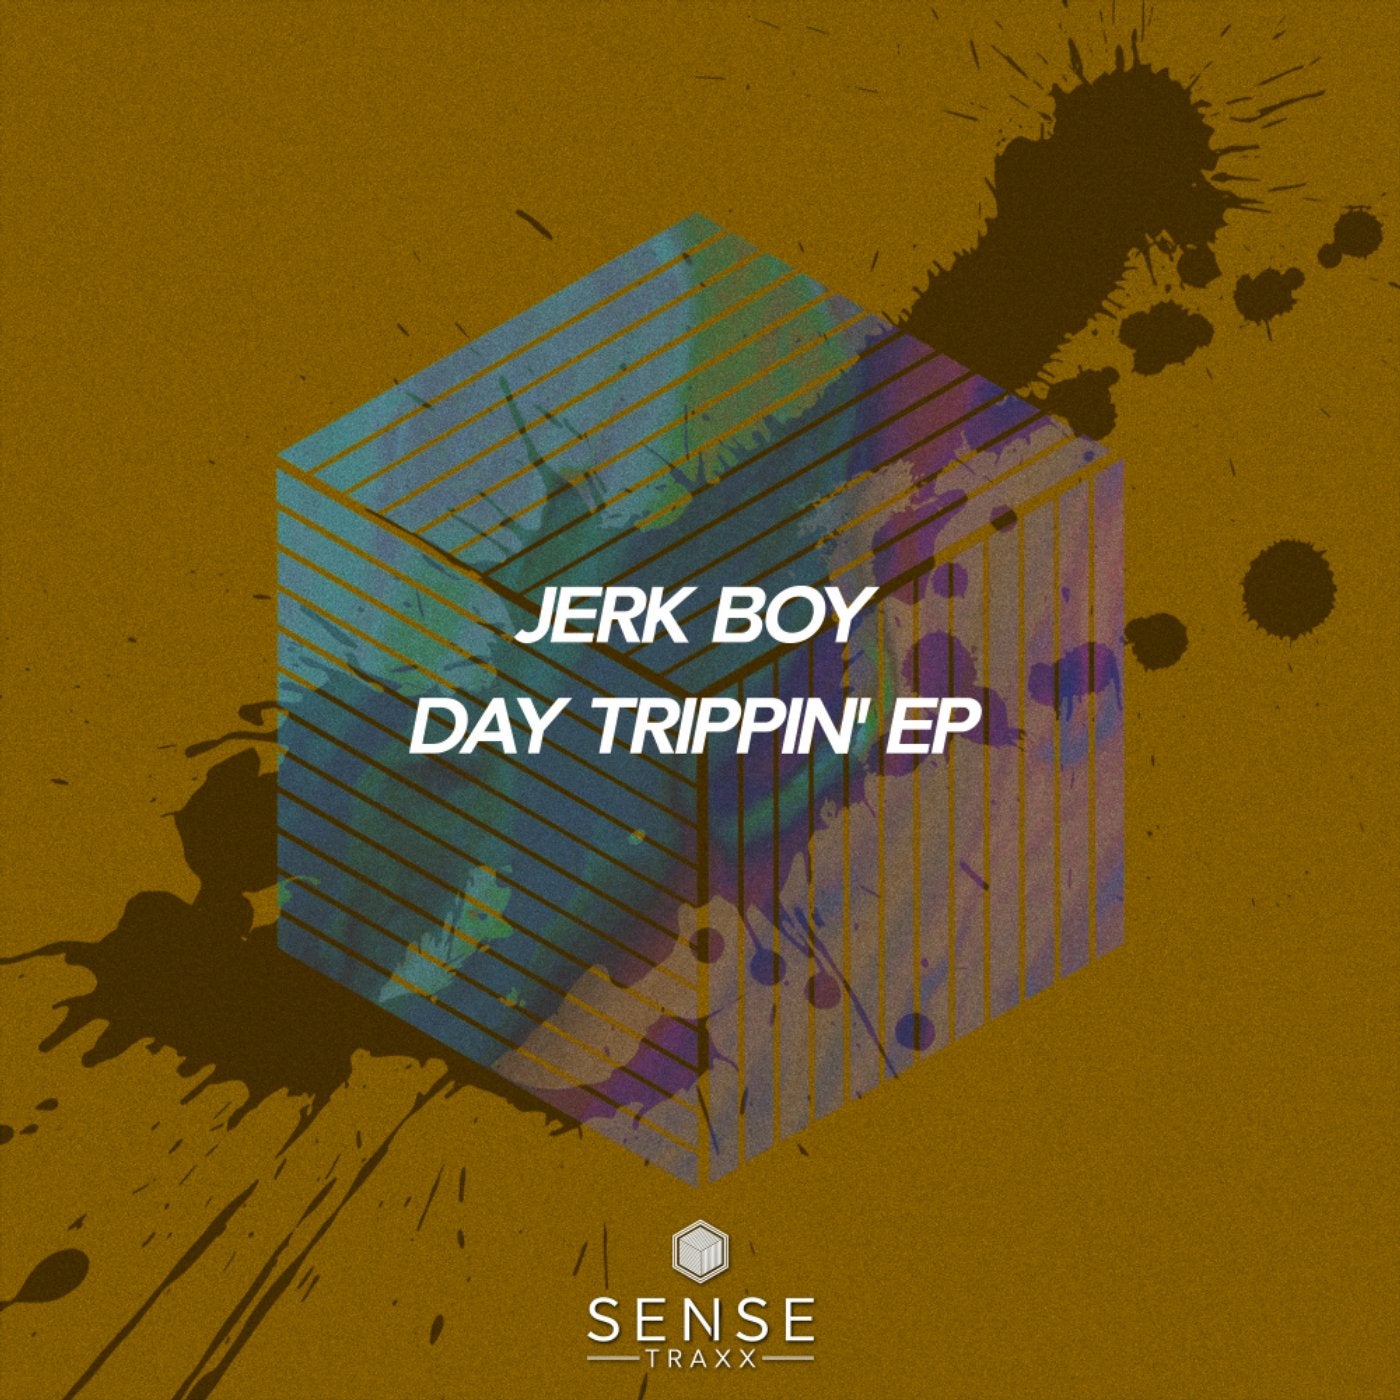 Day Trippin' EP